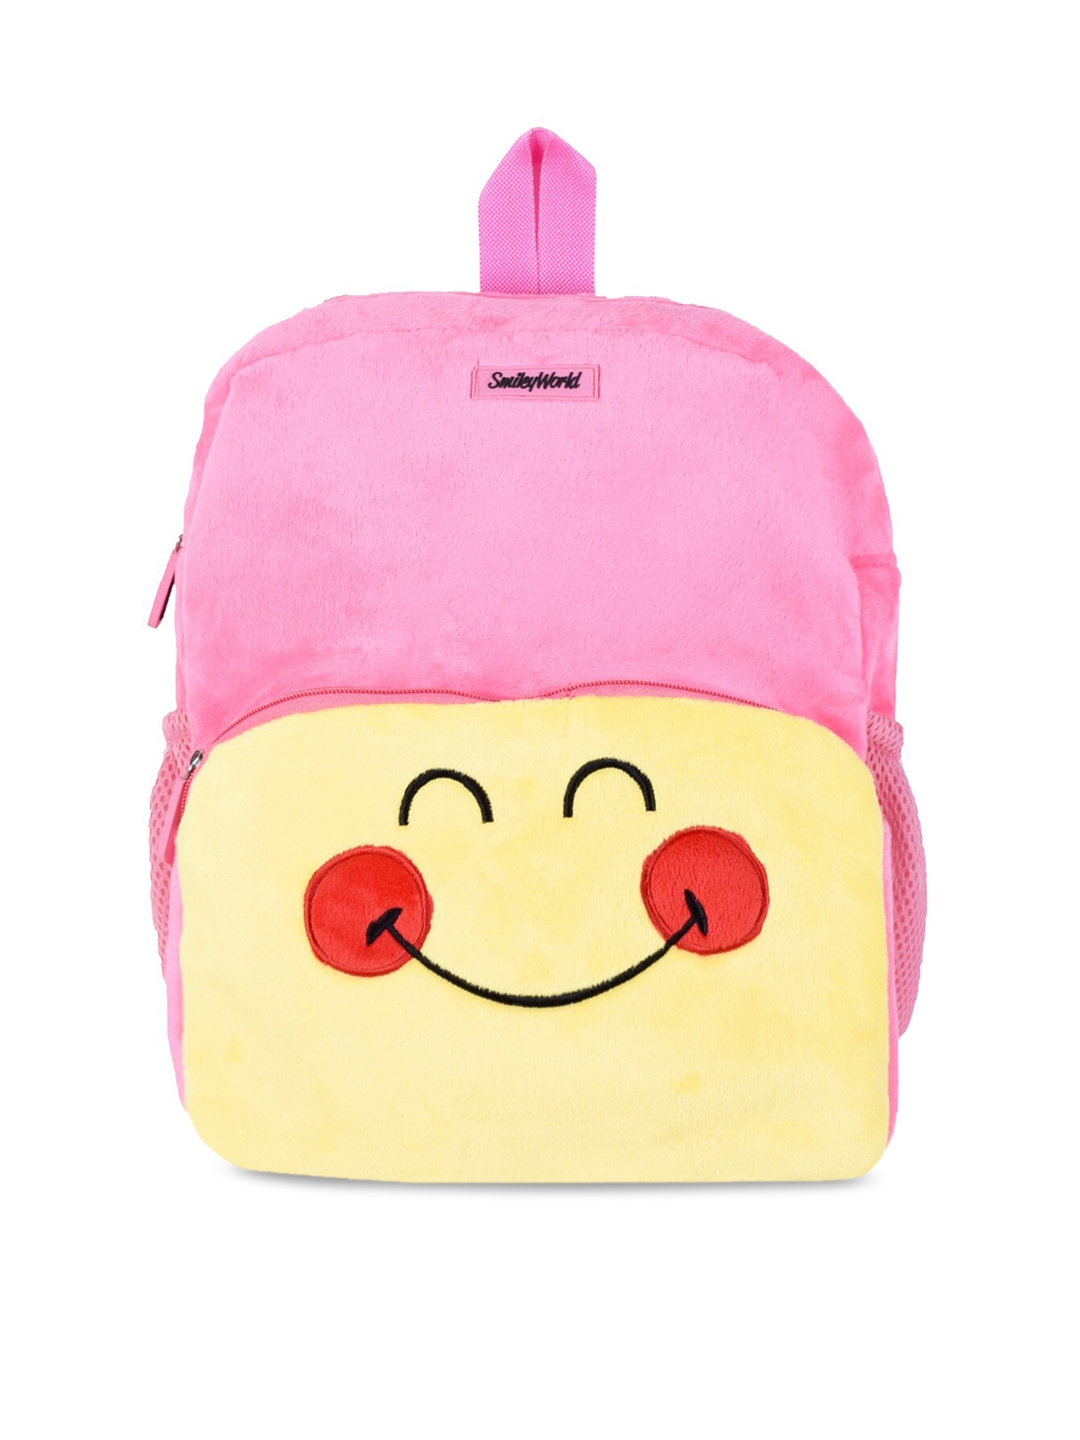 Smiley World Expression Happy Face Soft Toy Unisex Kids Pink   Yellow Backpack 14 inch